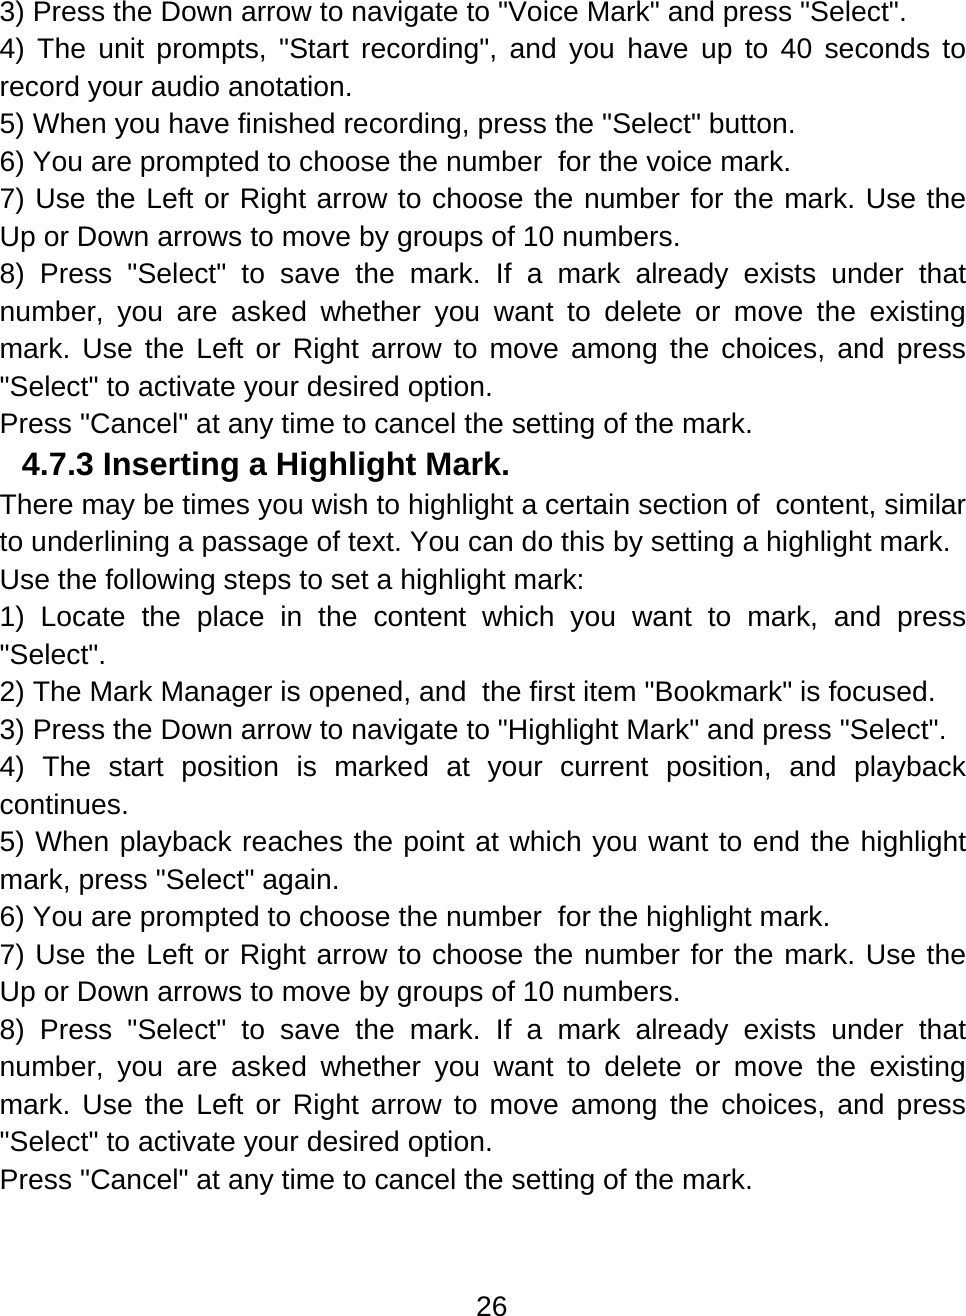 26  3) Press the Down arrow to navigate to &quot;Voice Mark&quot; and press &quot;Select&quot;. 4) The unit prompts, &quot;Start recording&quot;, and you have up to 40 seconds to record your audio anotation. 5) When you have finished recording, press the &quot;Select&quot; button. 6) You are prompted to choose the number  for the voice mark.  7) Use the Left or Right arrow to choose the number for the mark. Use the Up or Down arrows to move by groups of 10 numbers.     8) Press &quot;Select&quot; to save the mark. If a mark already exists under that number, you are asked whether you want to delete or move the existing mark. Use the Left or Right arrow to move among the choices, and press &quot;Select&quot; to activate your desired option. Press &quot;Cancel&quot; at any time to cancel the setting of the mark. 4.7.3 Inserting a Highlight Mark.  There may be times you wish to highlight a certain section of  content, similar to underlining a passage of text. You can do this by setting a highlight mark. Use the following steps to set a highlight mark: 1) Locate the place in the content which you want to mark, and press &quot;Select&quot;. 2) The Mark Manager is opened, and  the first item &quot;Bookmark&quot; is focused. 3) Press the Down arrow to navigate to &quot;Highlight Mark&quot; and press &quot;Select&quot;. 4) The start position is marked at your current position, and playback continues. 5) When playback reaches the point at which you want to end the highlight mark, press &quot;Select&quot; again.  6) You are prompted to choose the number  for the highlight mark.  7) Use the Left or Right arrow to choose the number for the mark. Use the Up or Down arrows to move by groups of 10 numbers.     8) Press &quot;Select&quot; to save the mark. If a mark already exists under that number, you are asked whether you want to delete or move the existing mark. Use the Left or Right arrow to move among the choices, and press &quot;Select&quot; to activate your desired option. Press &quot;Cancel&quot; at any time to cancel the setting of the mark.   